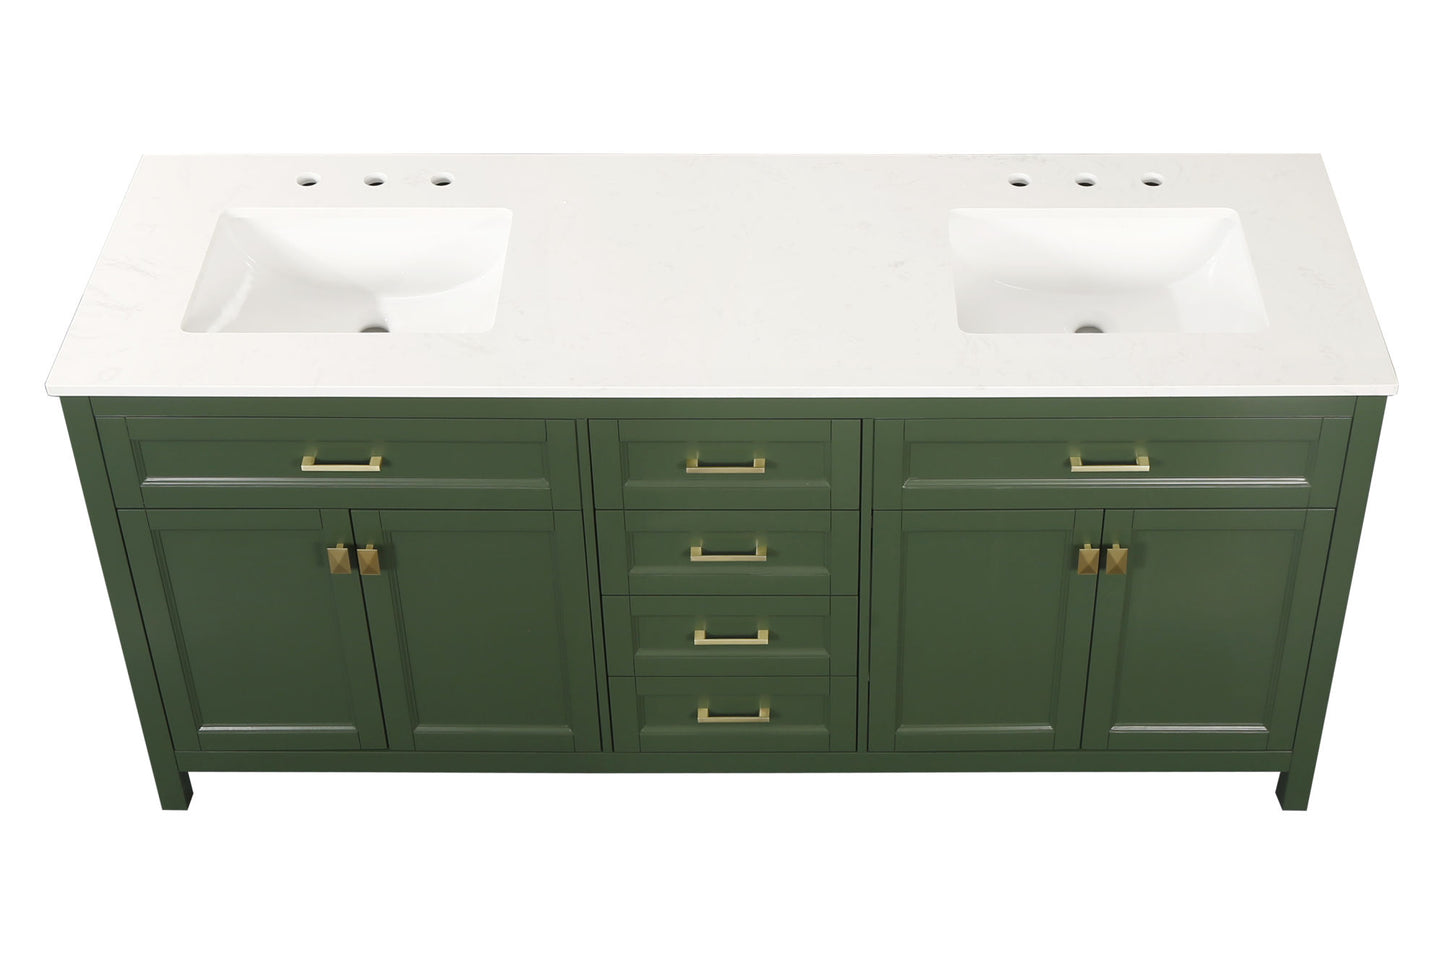 Vanity Sink Combo featuring a Marble Countertop, Bathroom Sink Cabinet, and Home Decor Bathroom Vanities - Fully Assembled White 72-inch Vanity with Sink 23V03-72VG